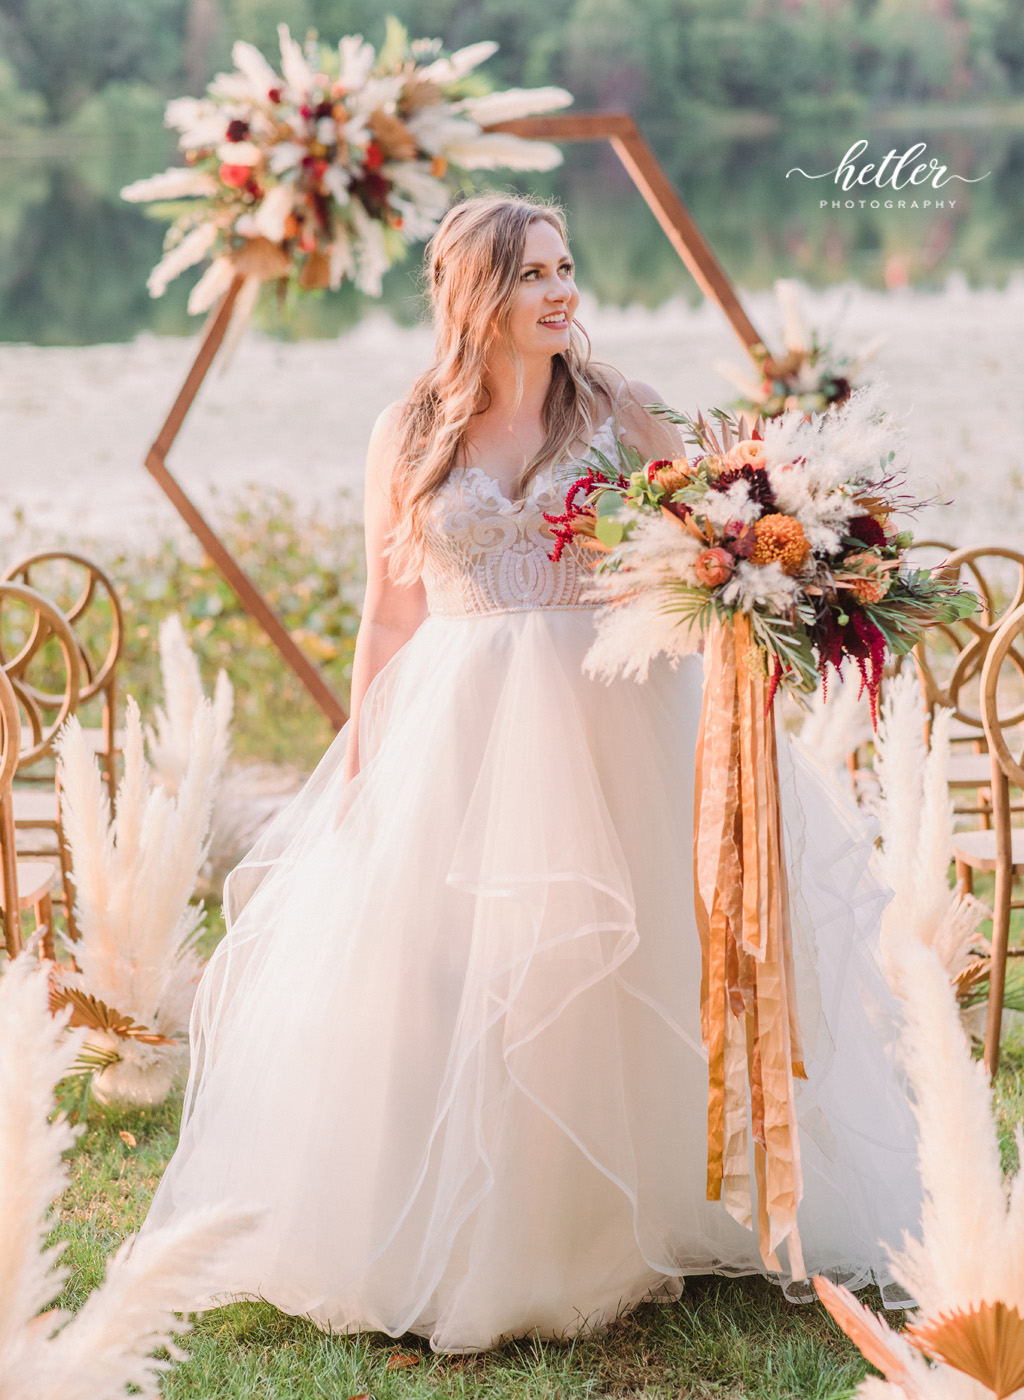 Bride in Hayley Paige gown from Becker's Bridal at lakeside wedding